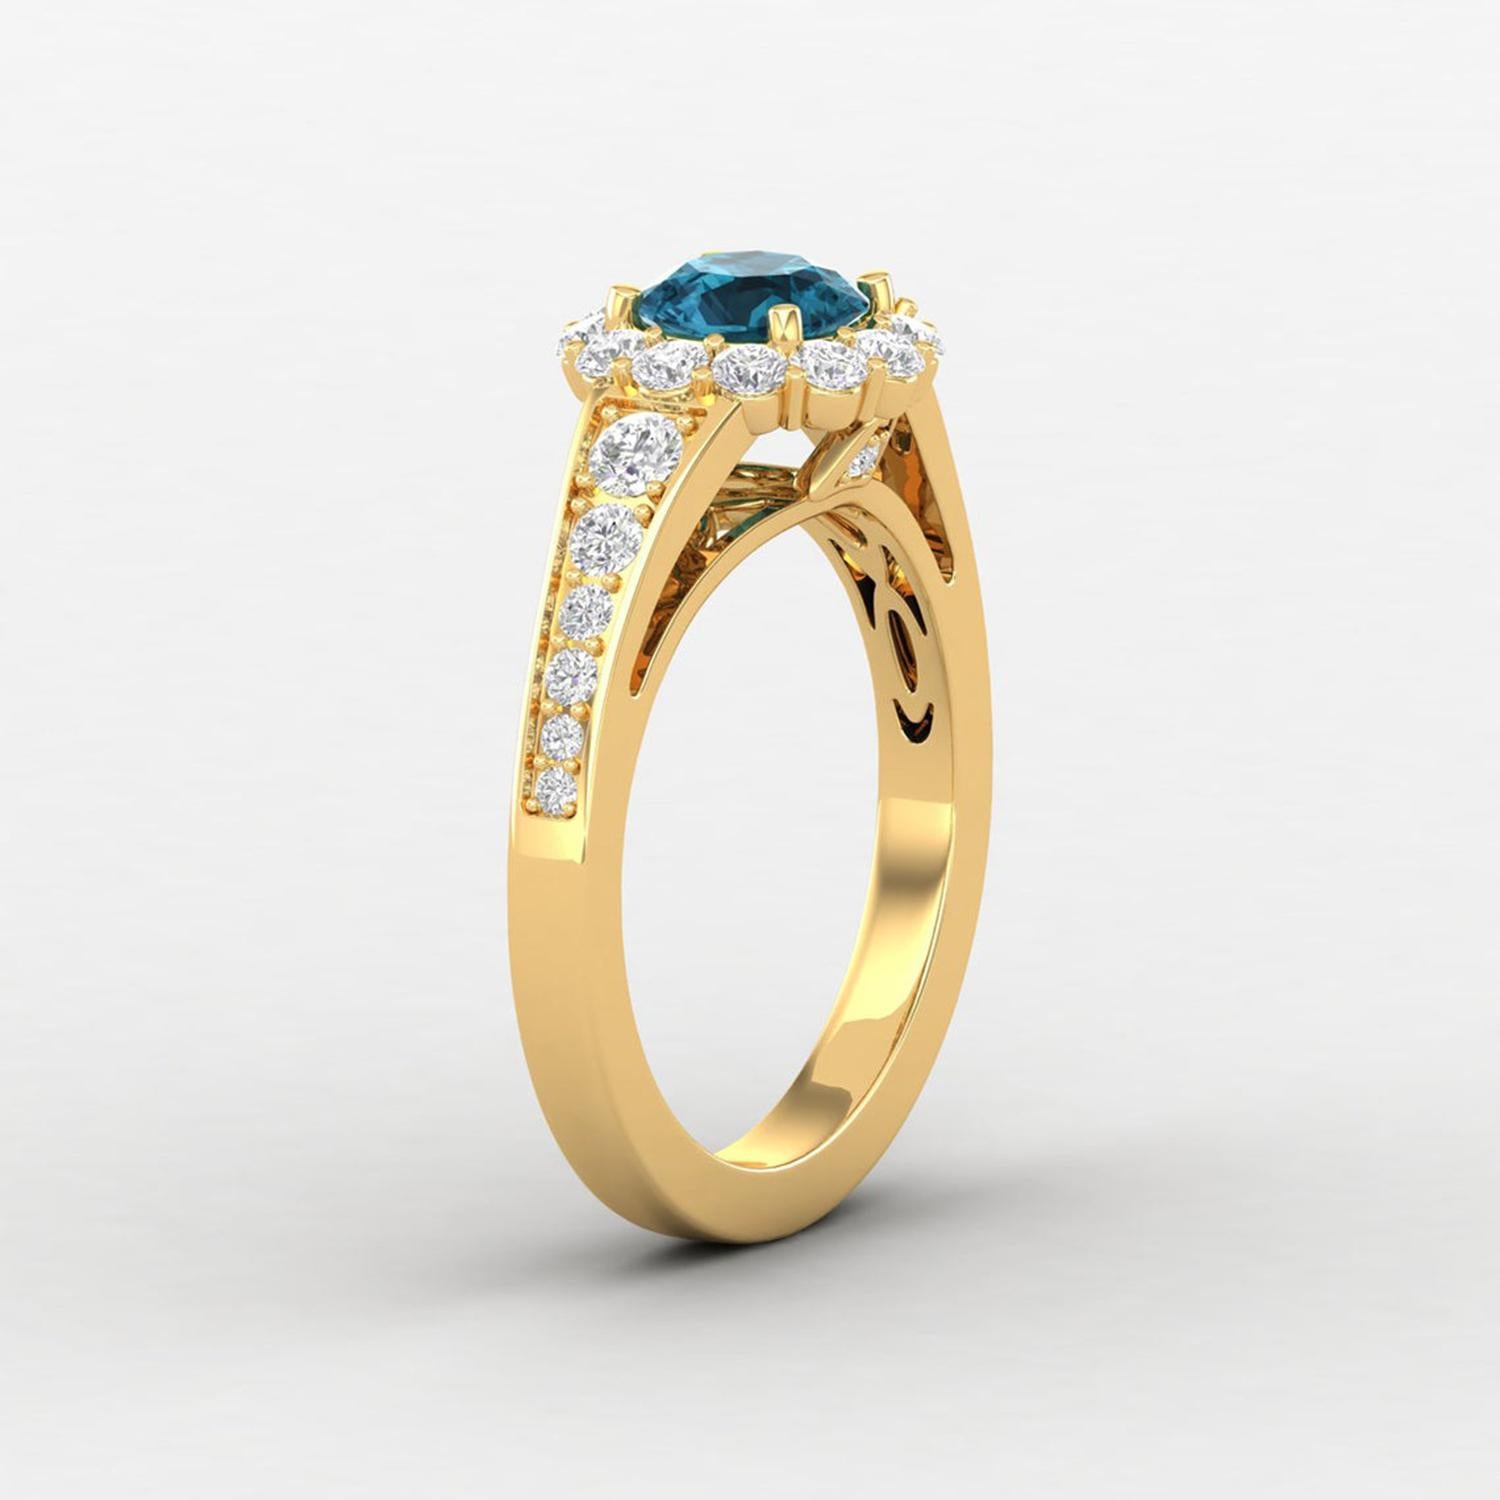 Round Cut 14 Karat Gold 5 MM Swiss Topaz Ring / 2.5 MM Round Diamond Ring / Solitaire Ring For Sale